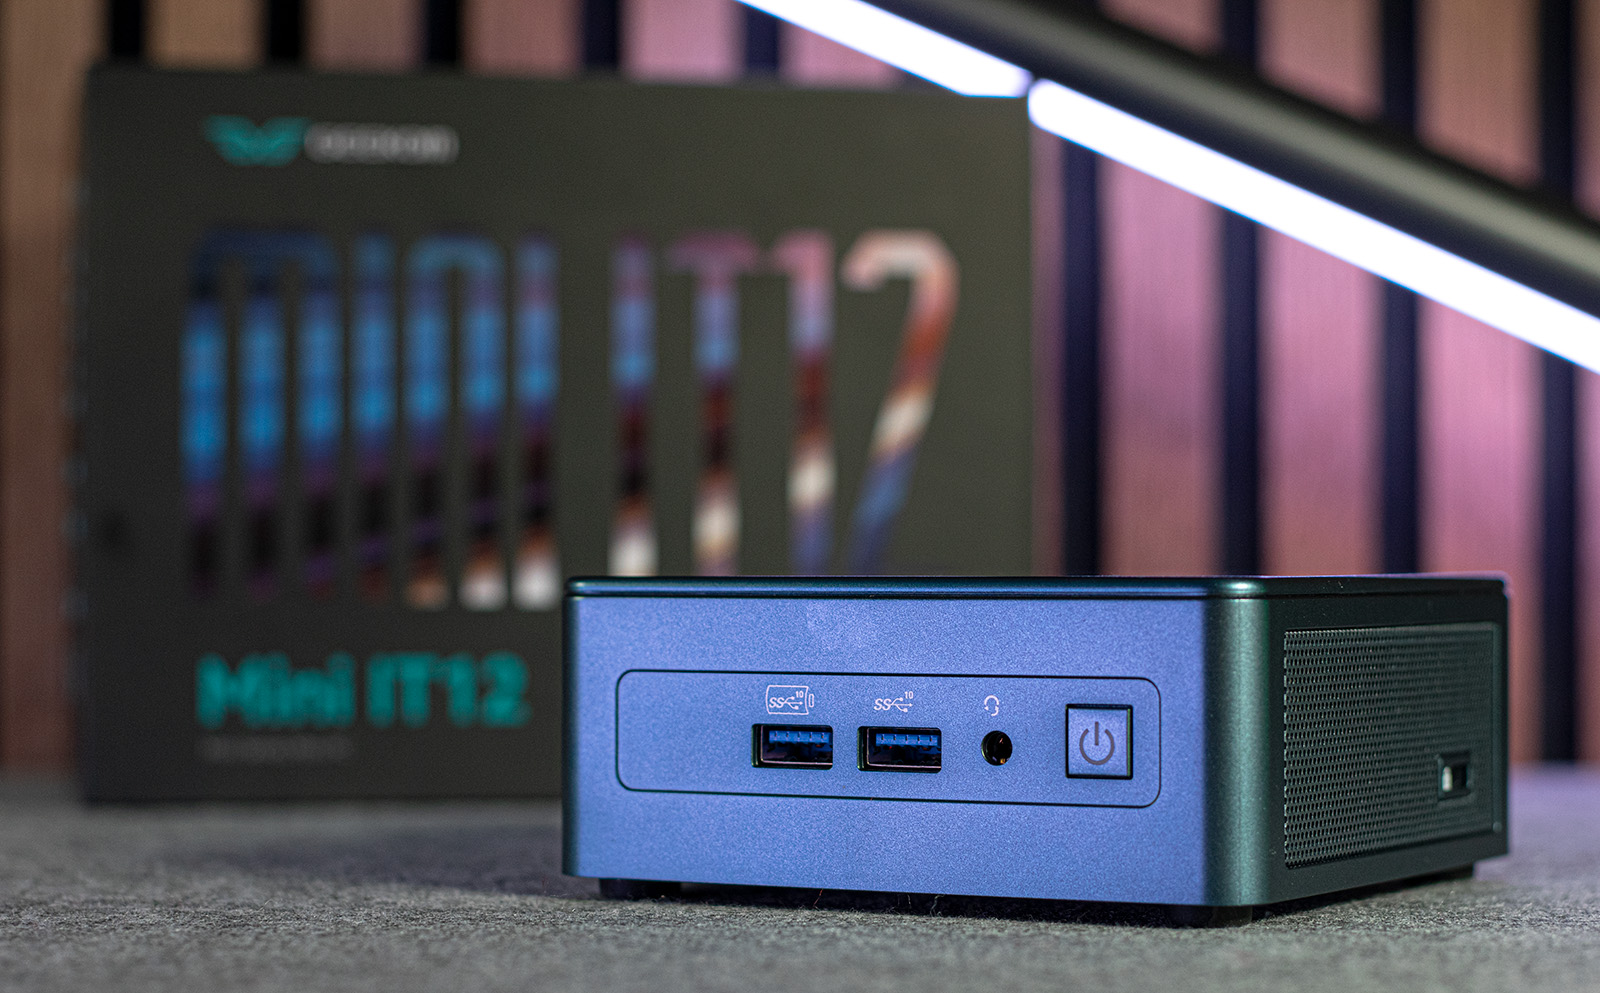 The World's First Mini PC with AirJet® has arrived – with features